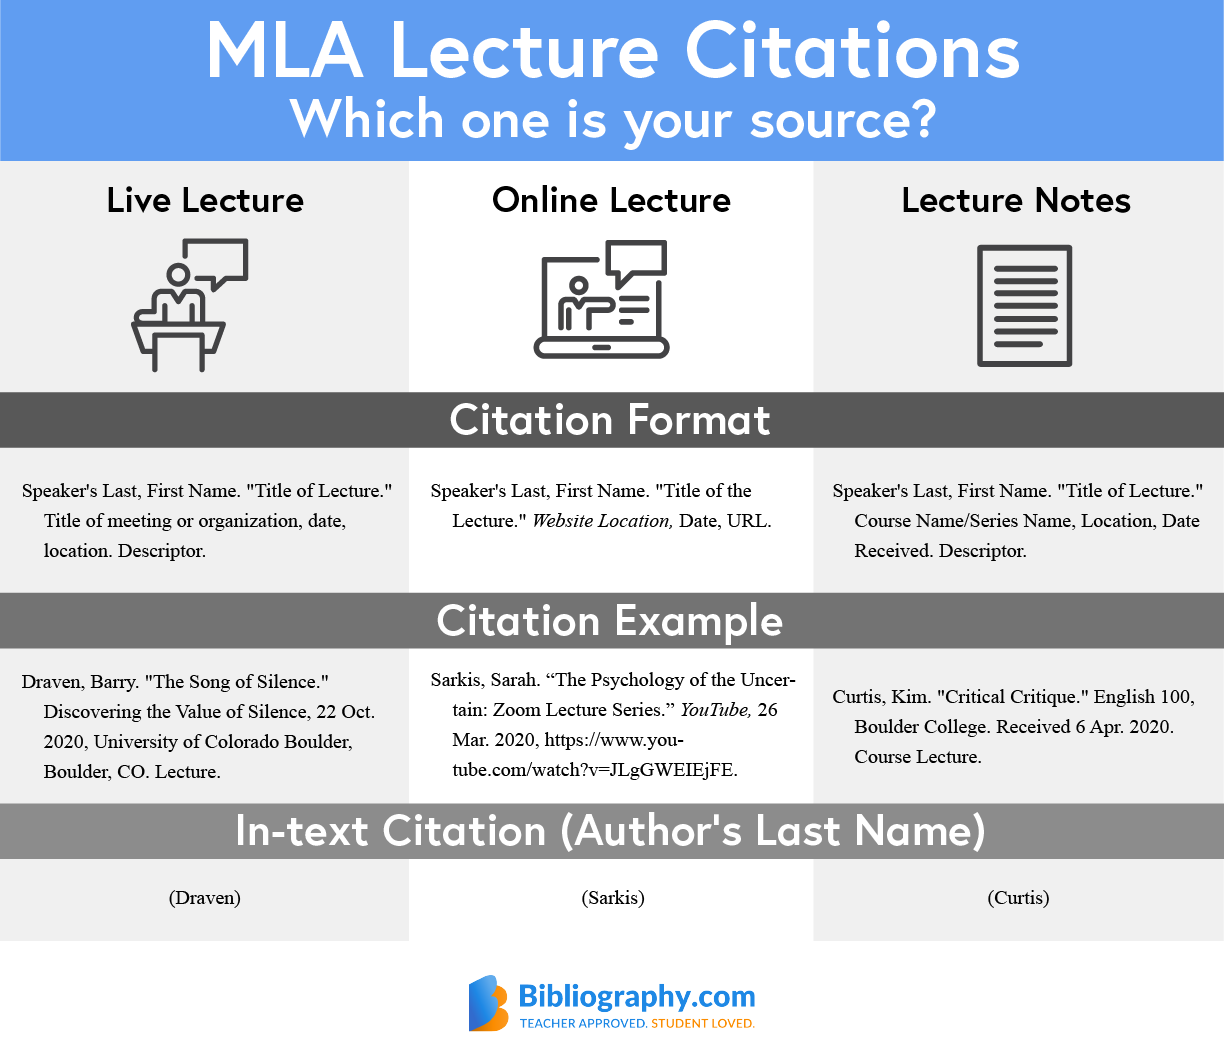 MLA Lecture Citations infographic